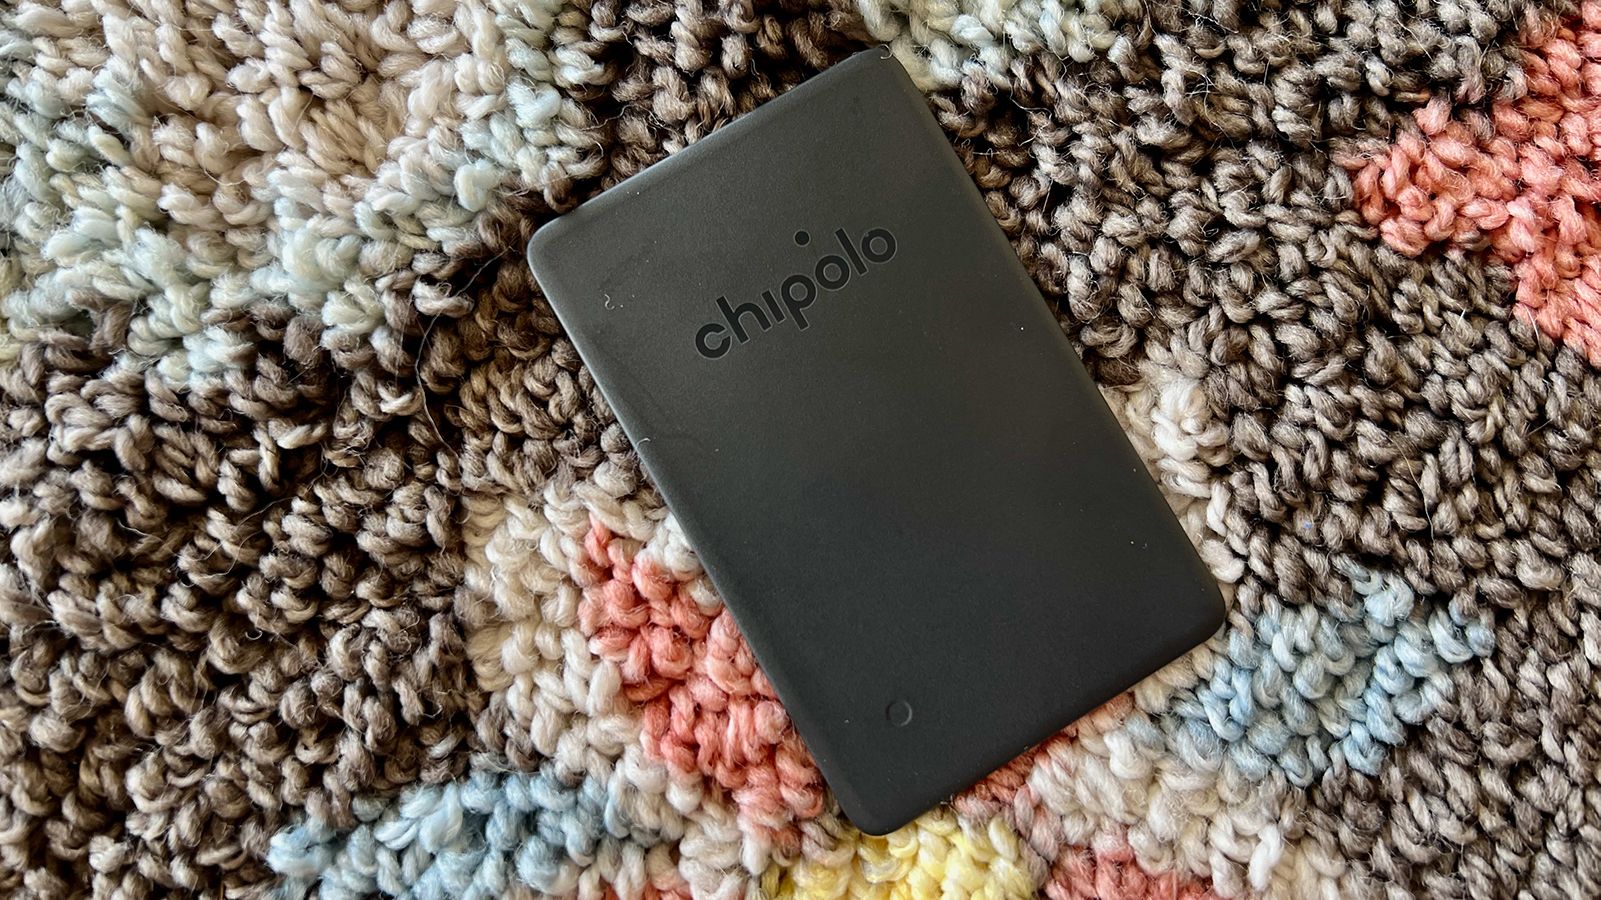 Chipolo Card Spot review: Card-sized tracker works with Apple's